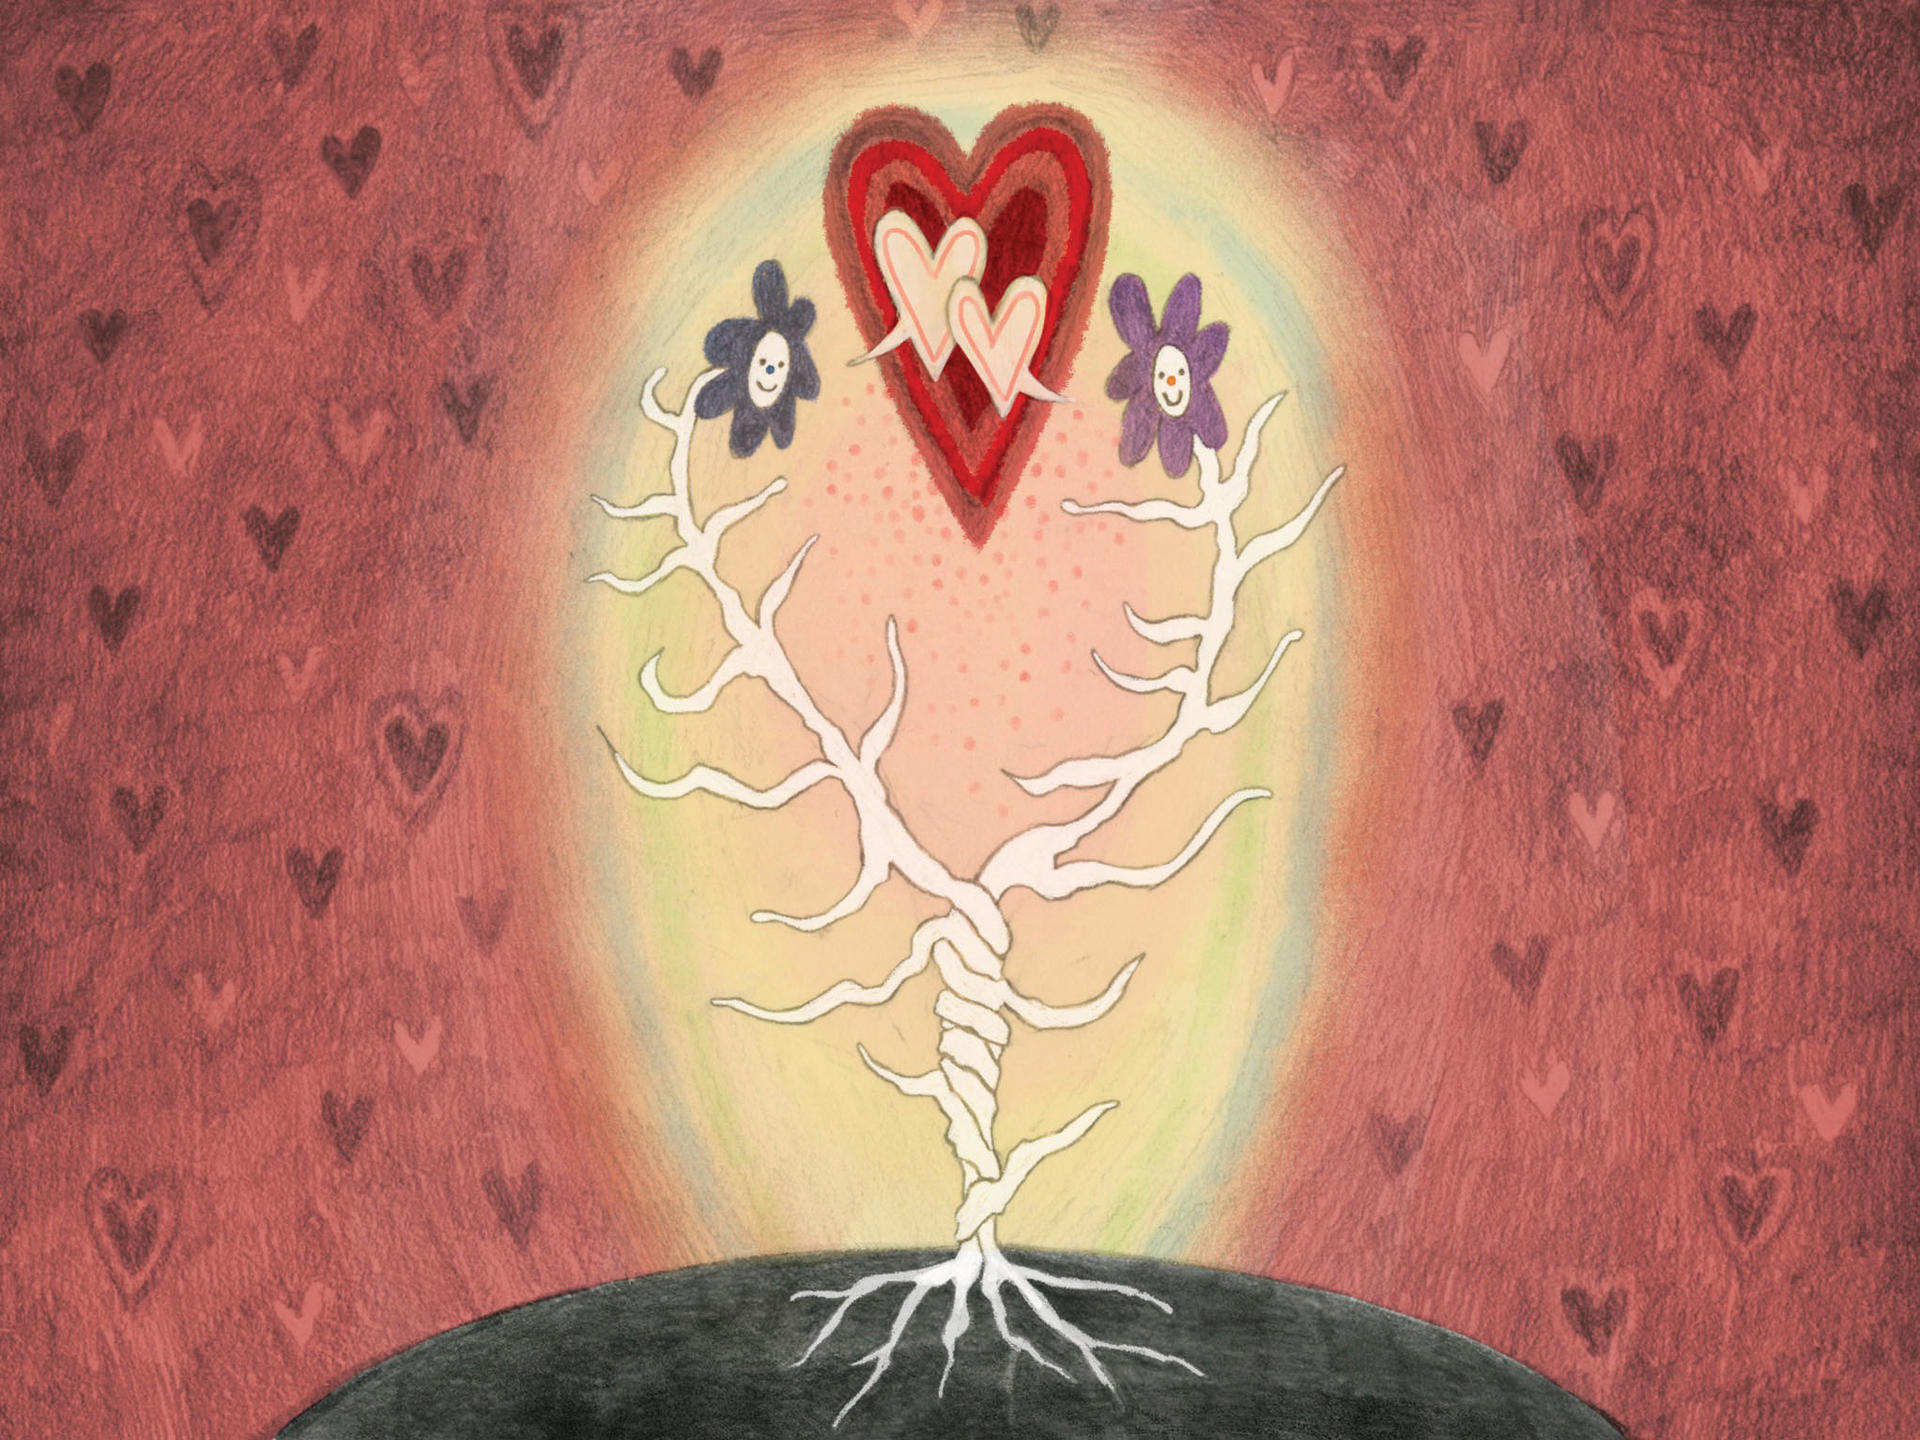 two intertwined roots talking about love